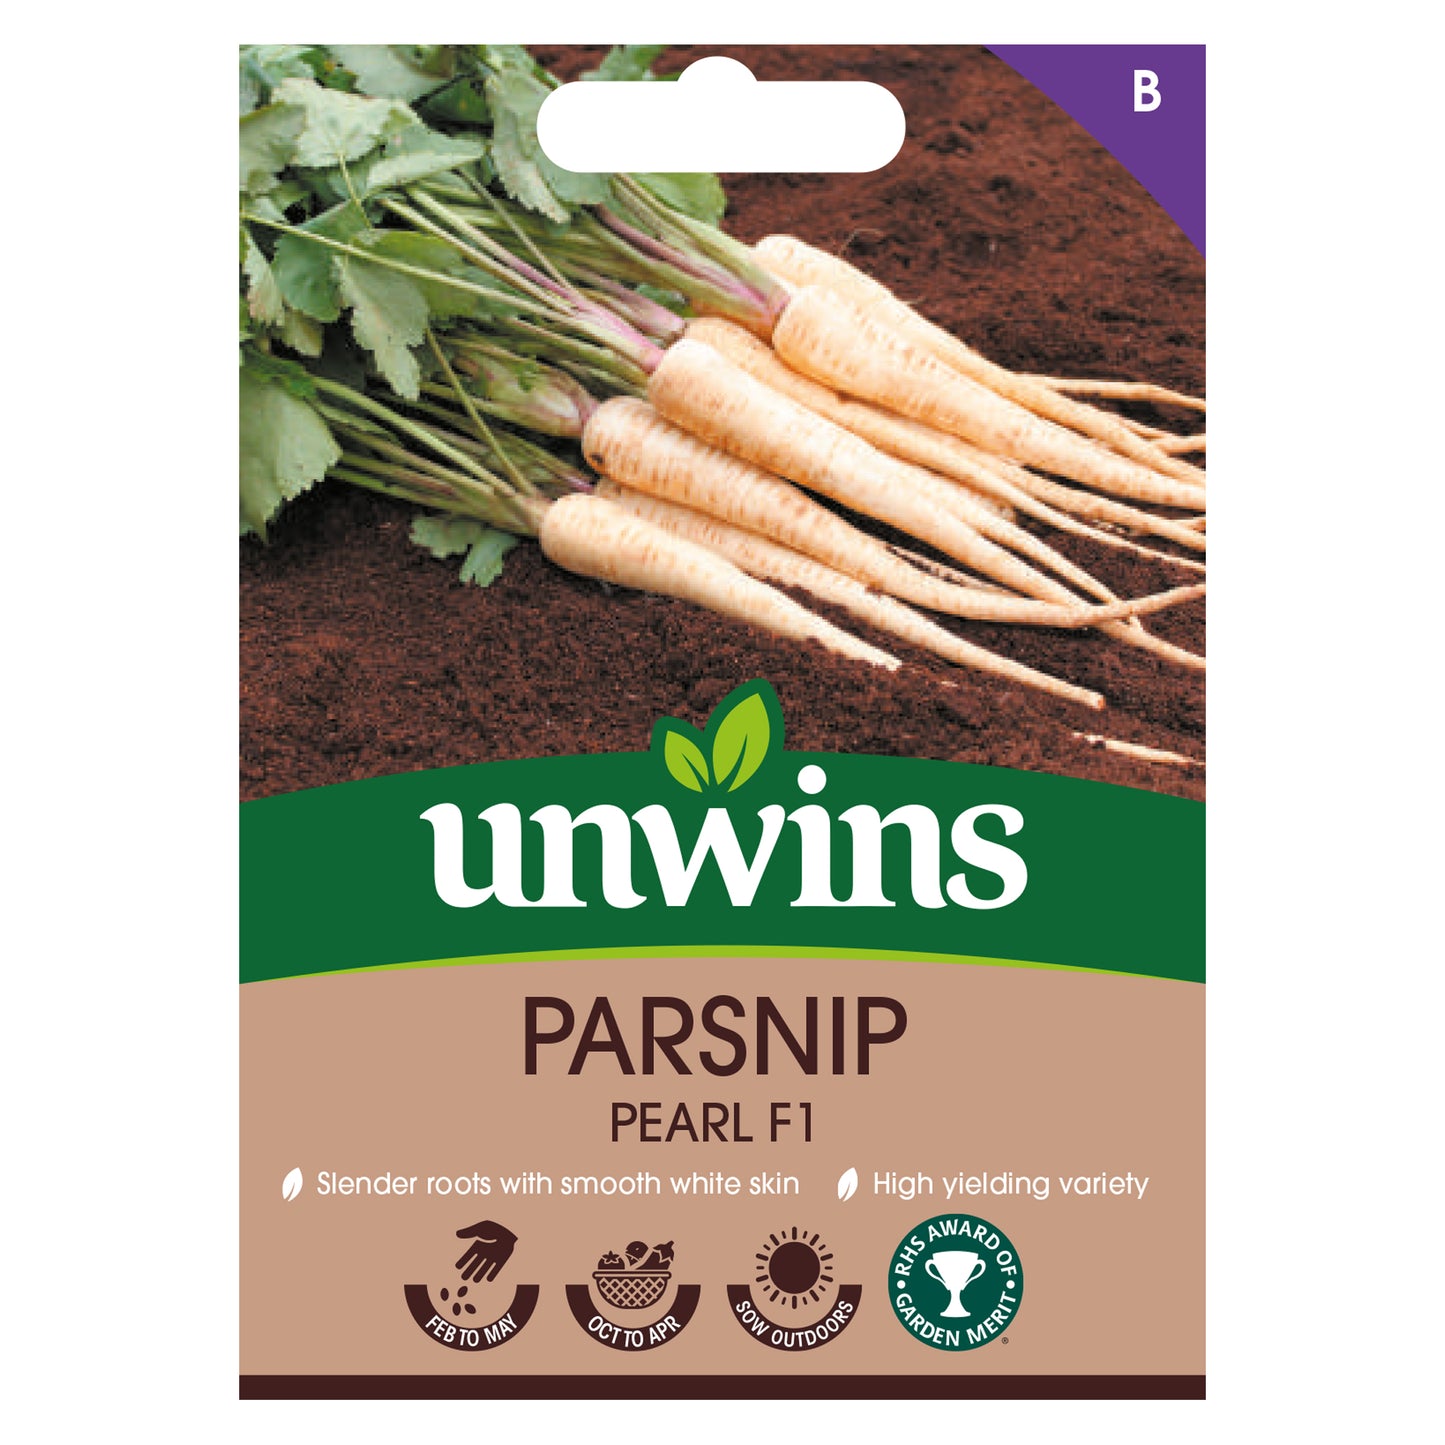 Unwins Parsnip Pearl F1 Seeds front of pack